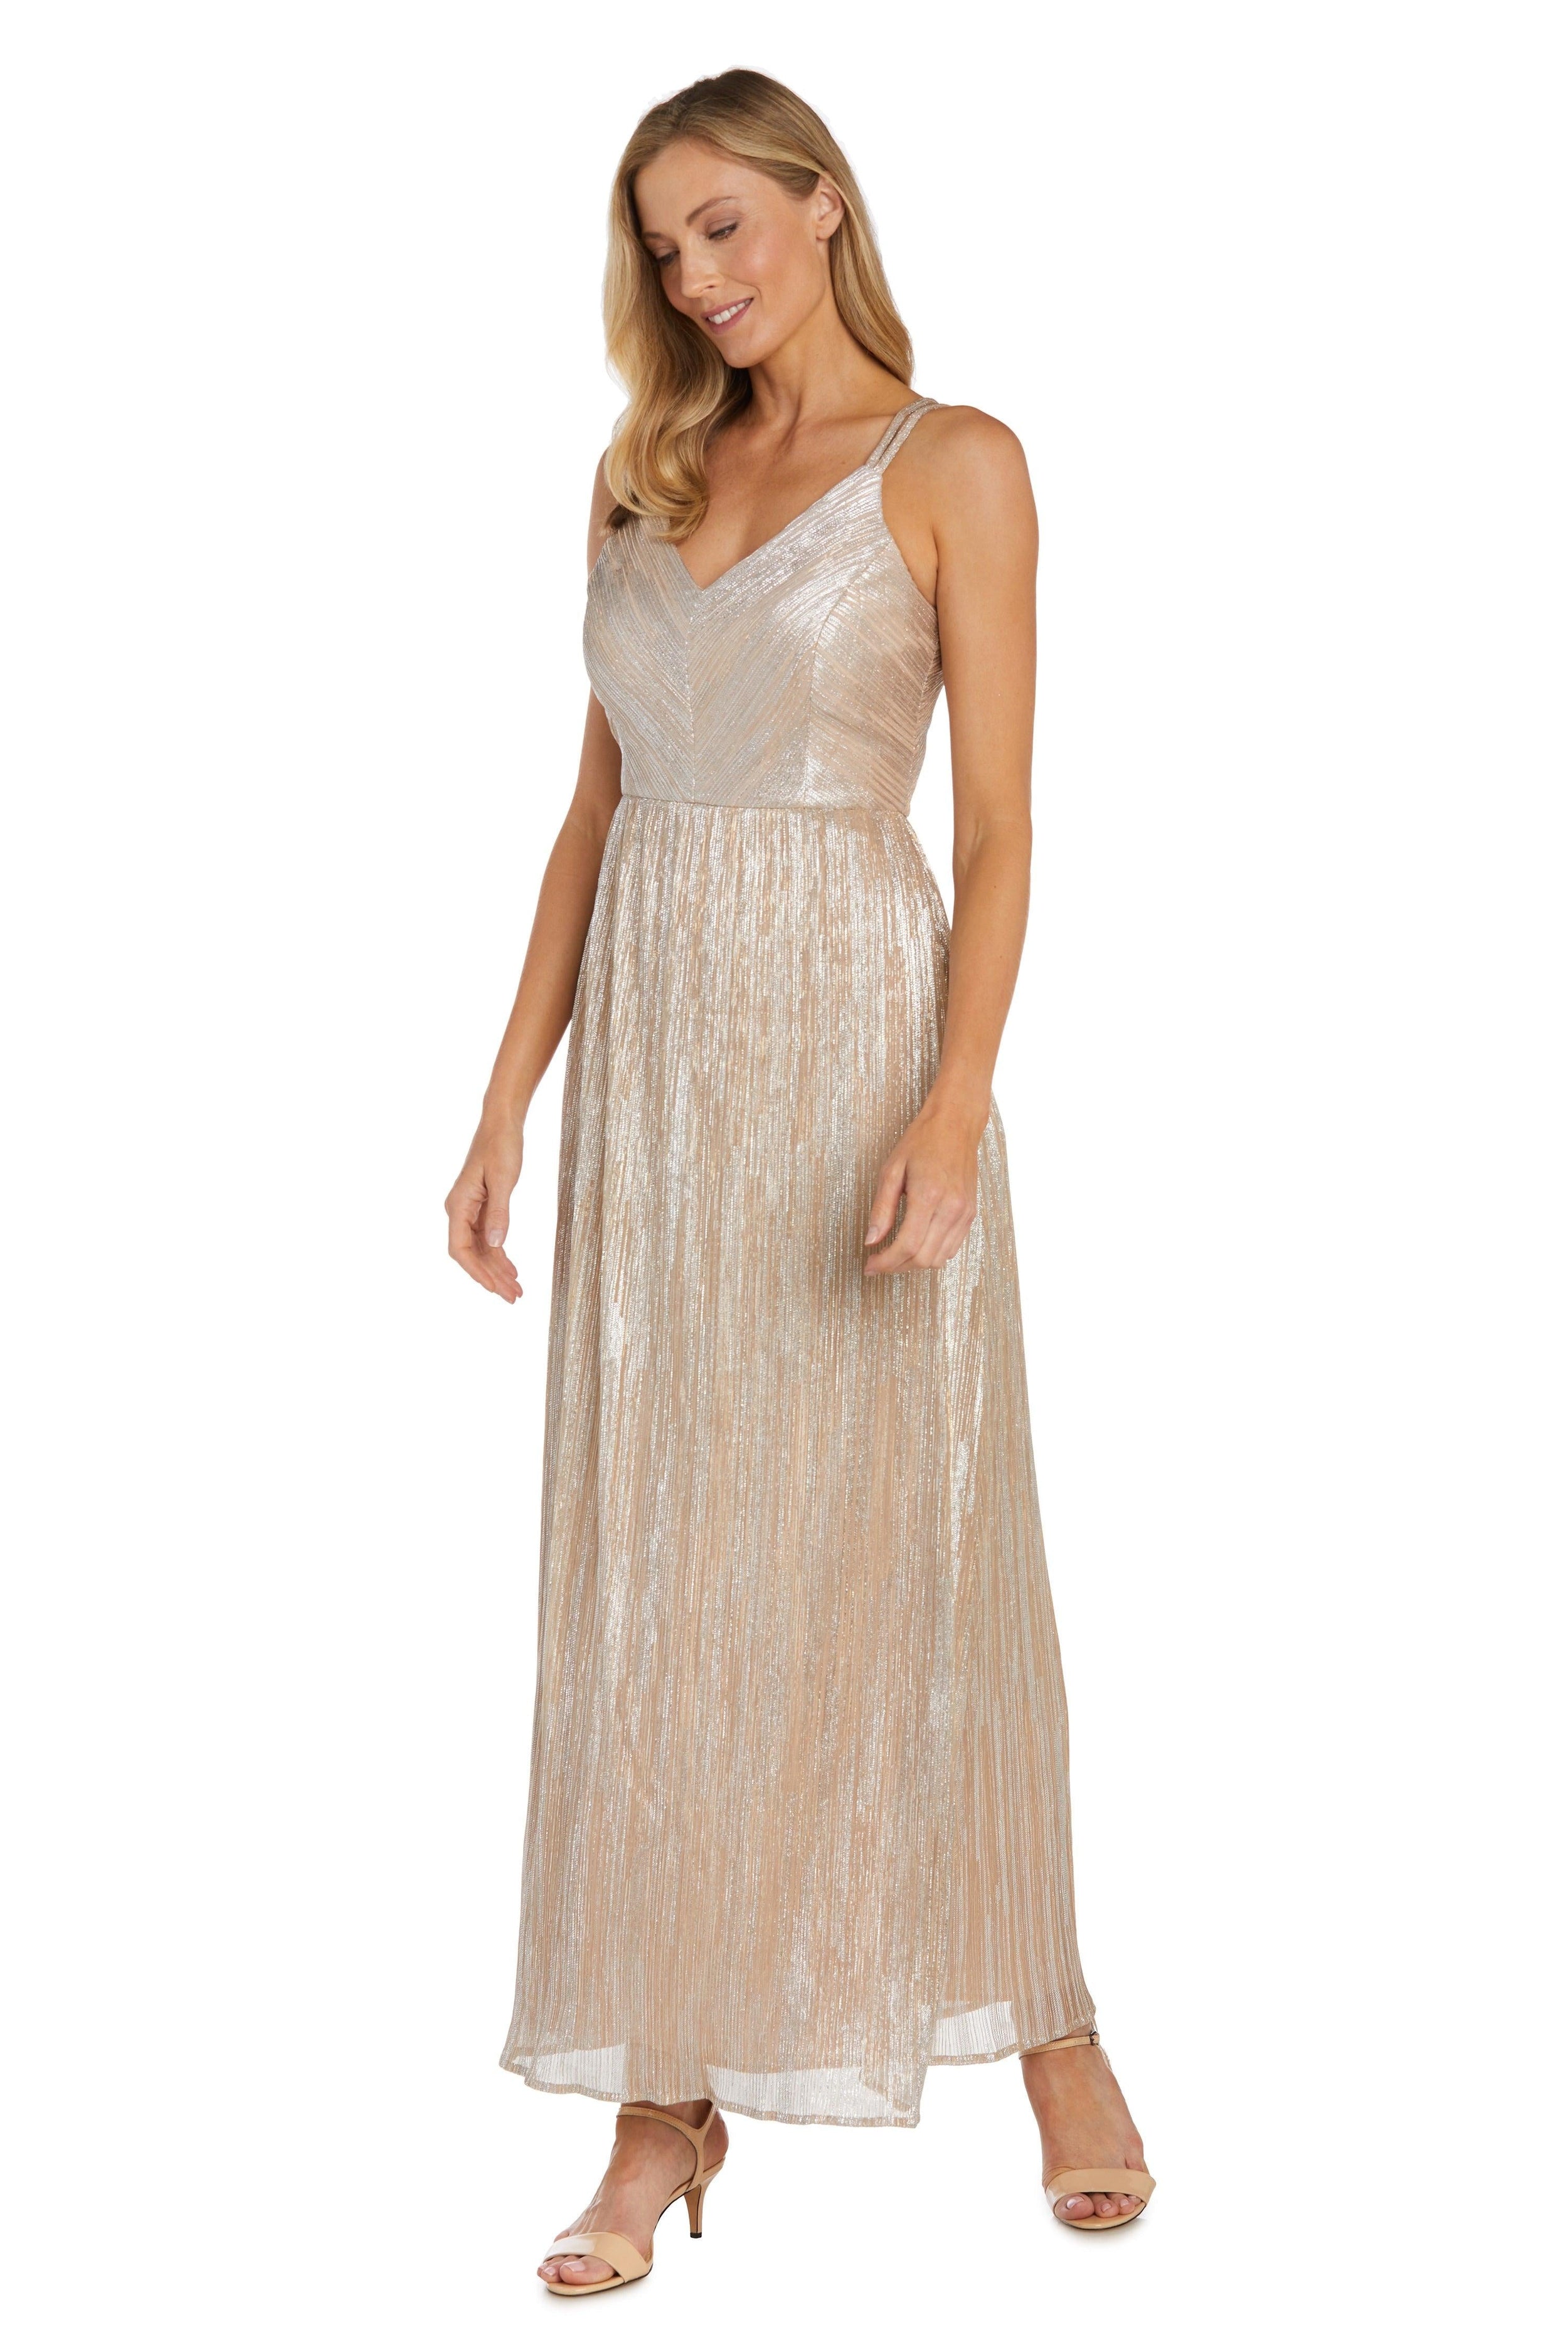 Nightway Long Formal Evening Gown 22031 - The Dress Outlet